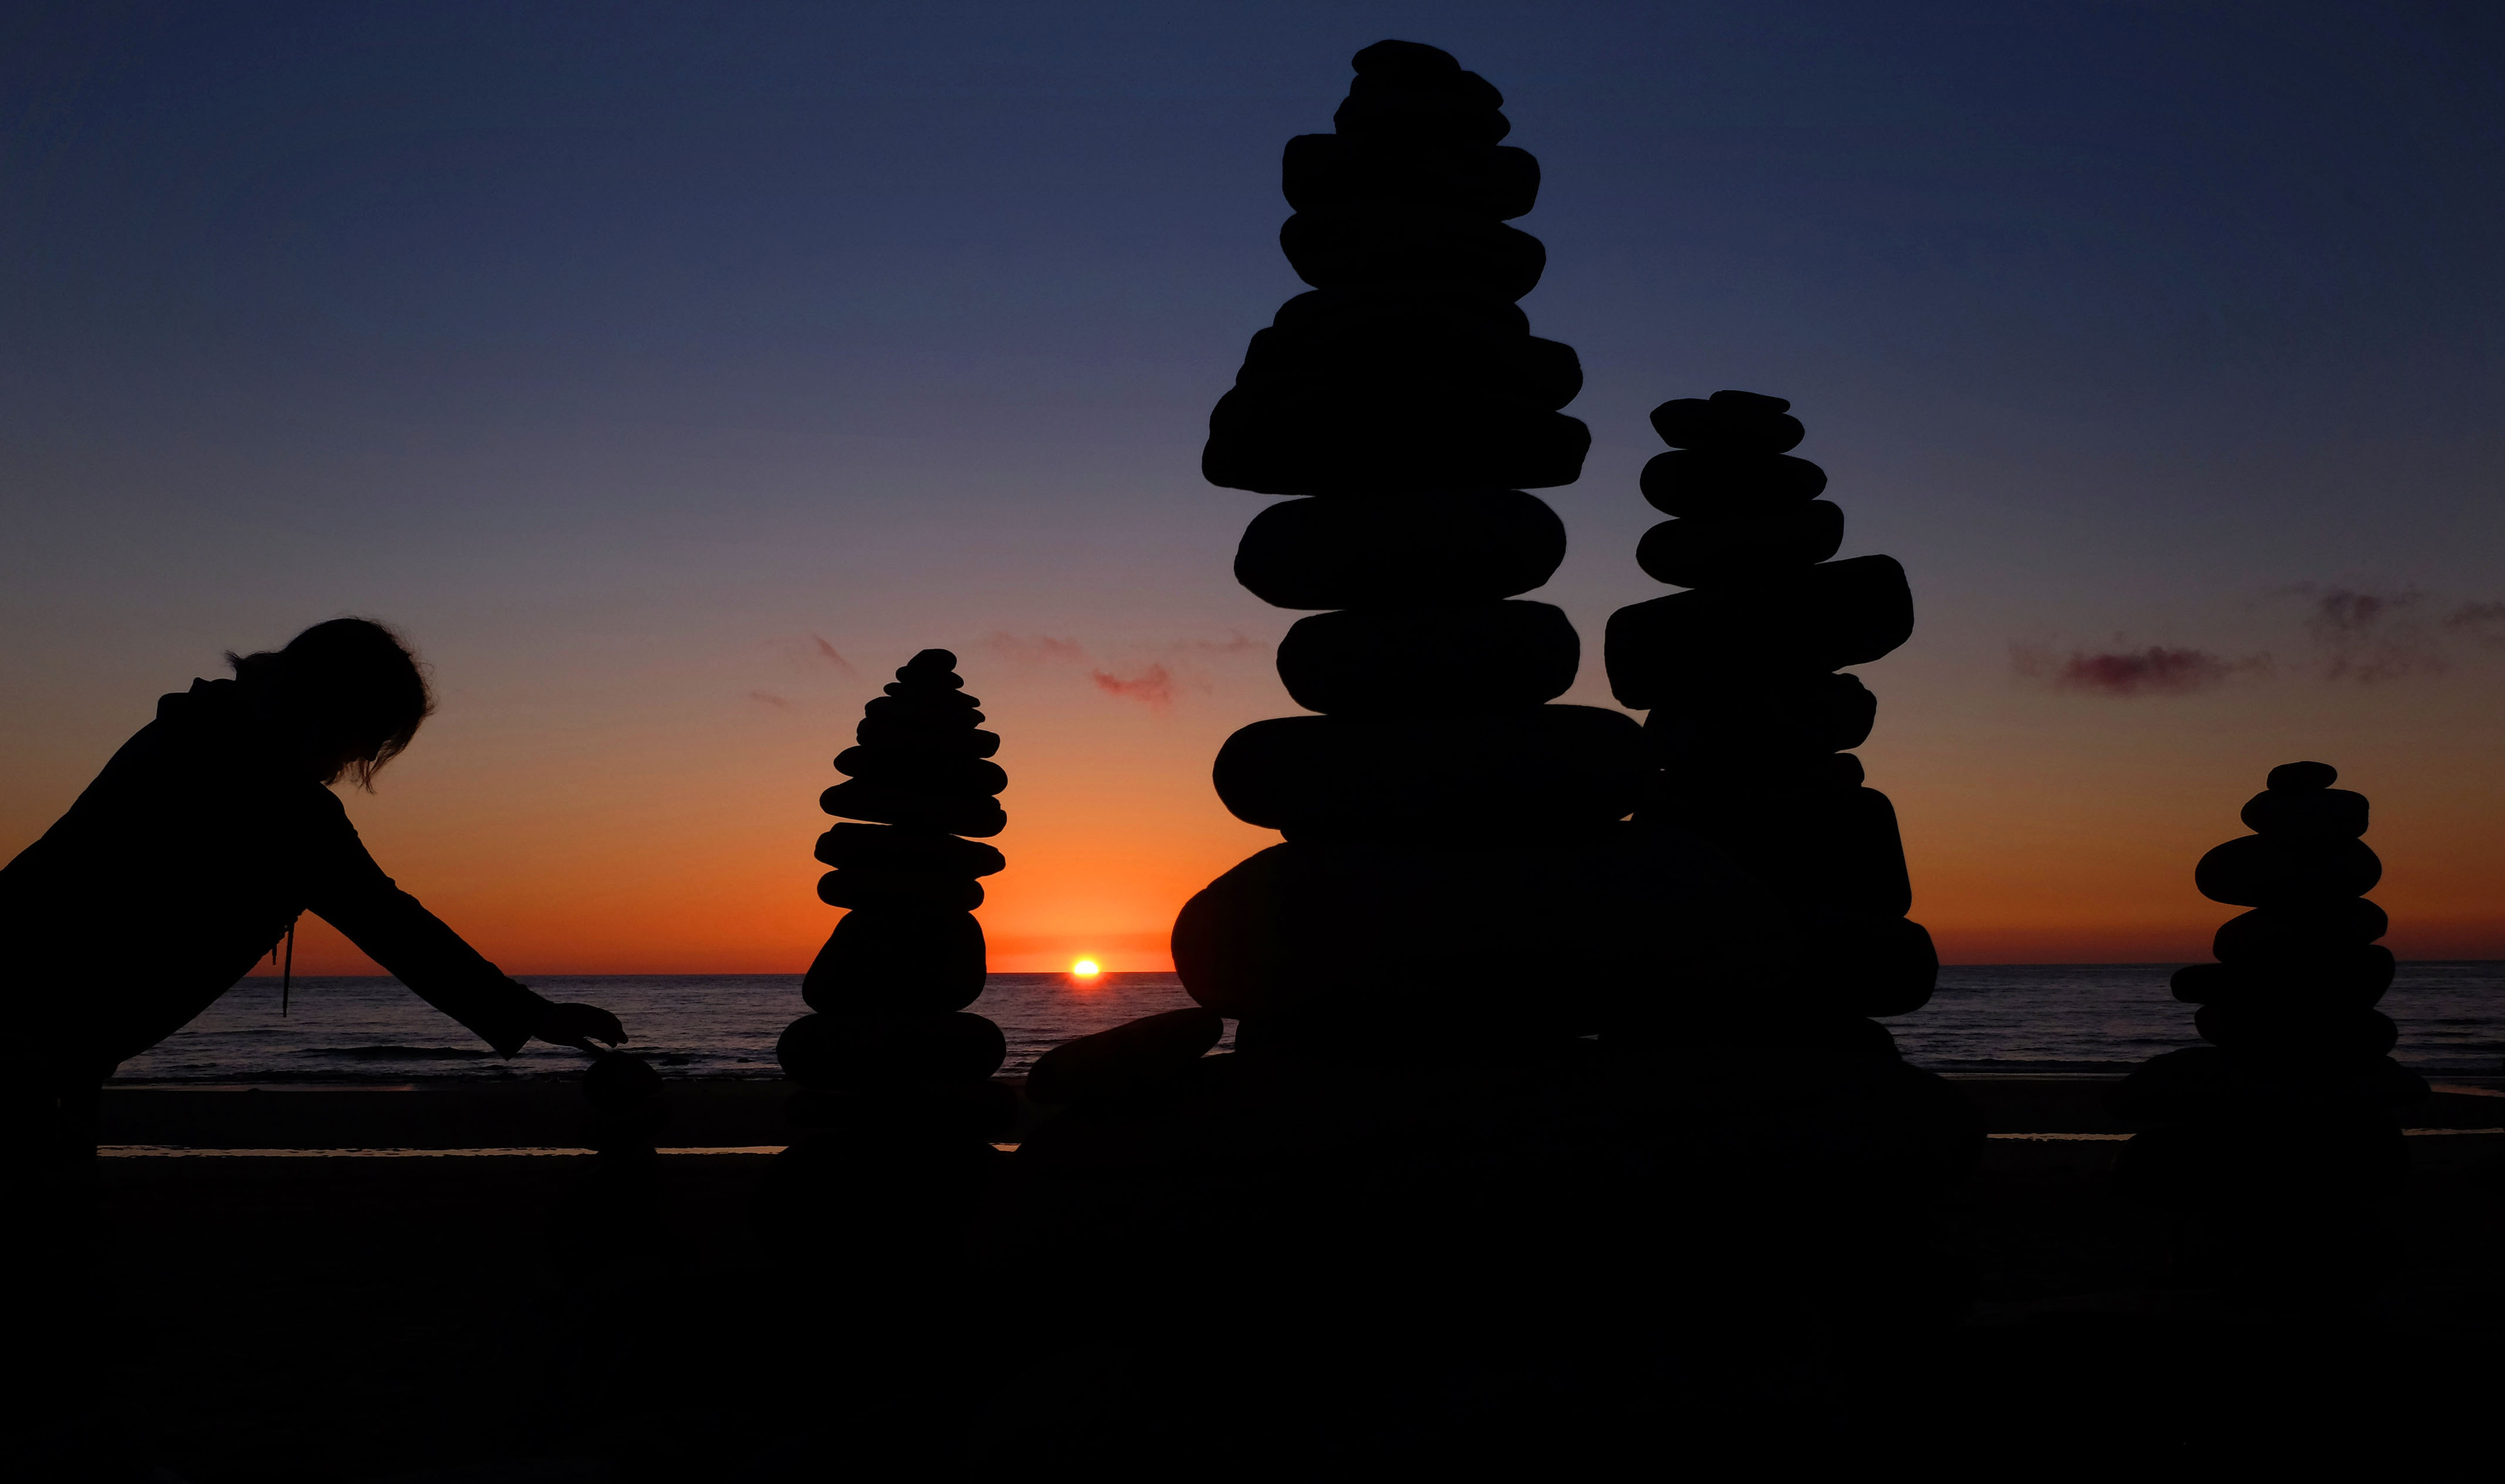 Pebble sculptures in Whitley Bay